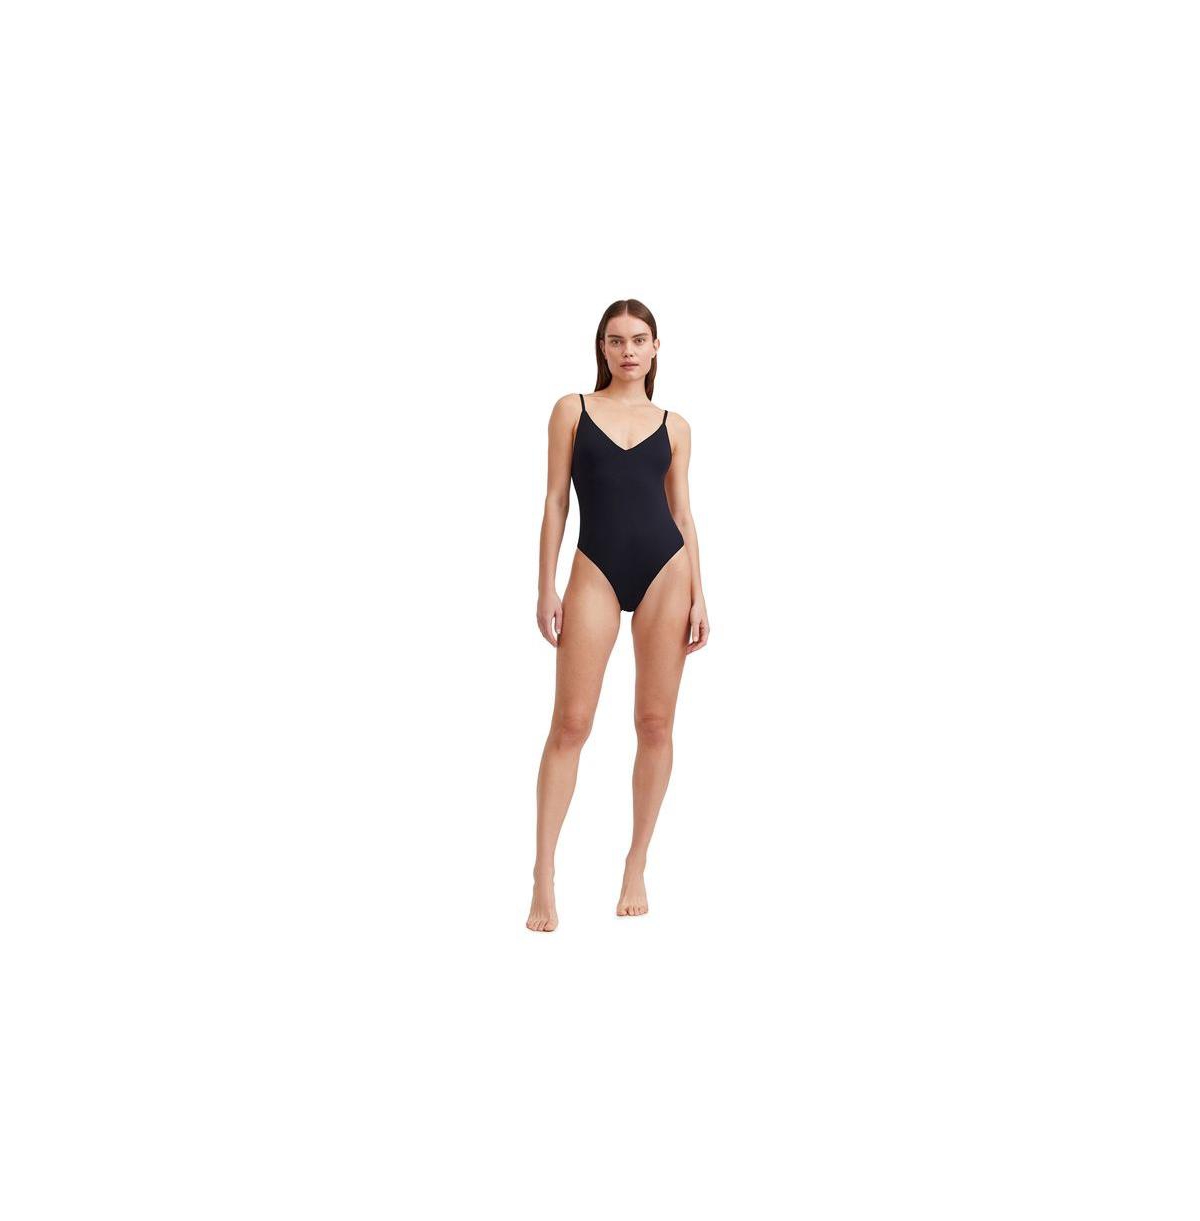 Women's Solid V neck one piece swimsuit with strap back detail - Black